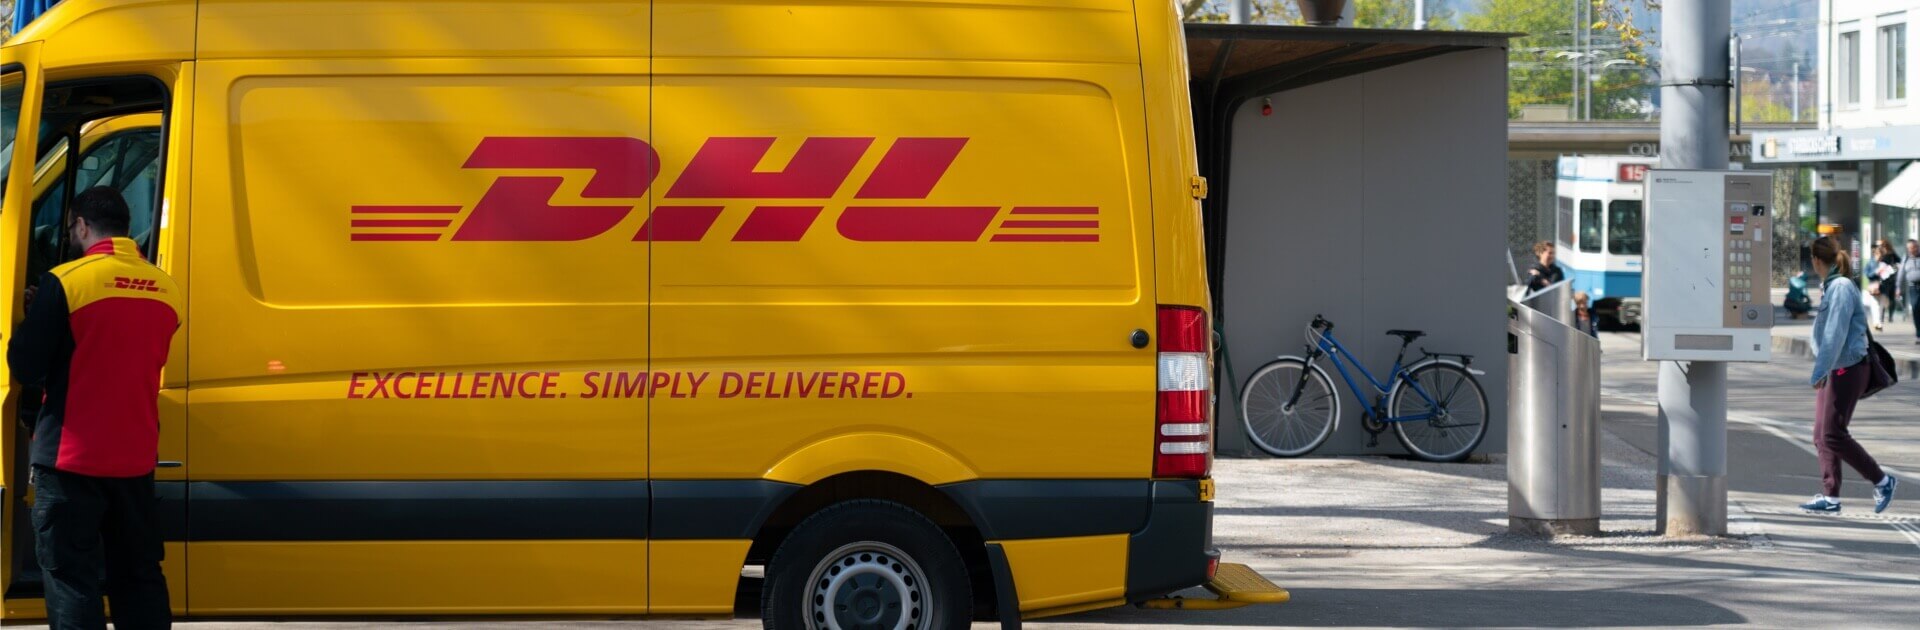 DHL and FedEx Shipping - International & Local Services in Miami, FL